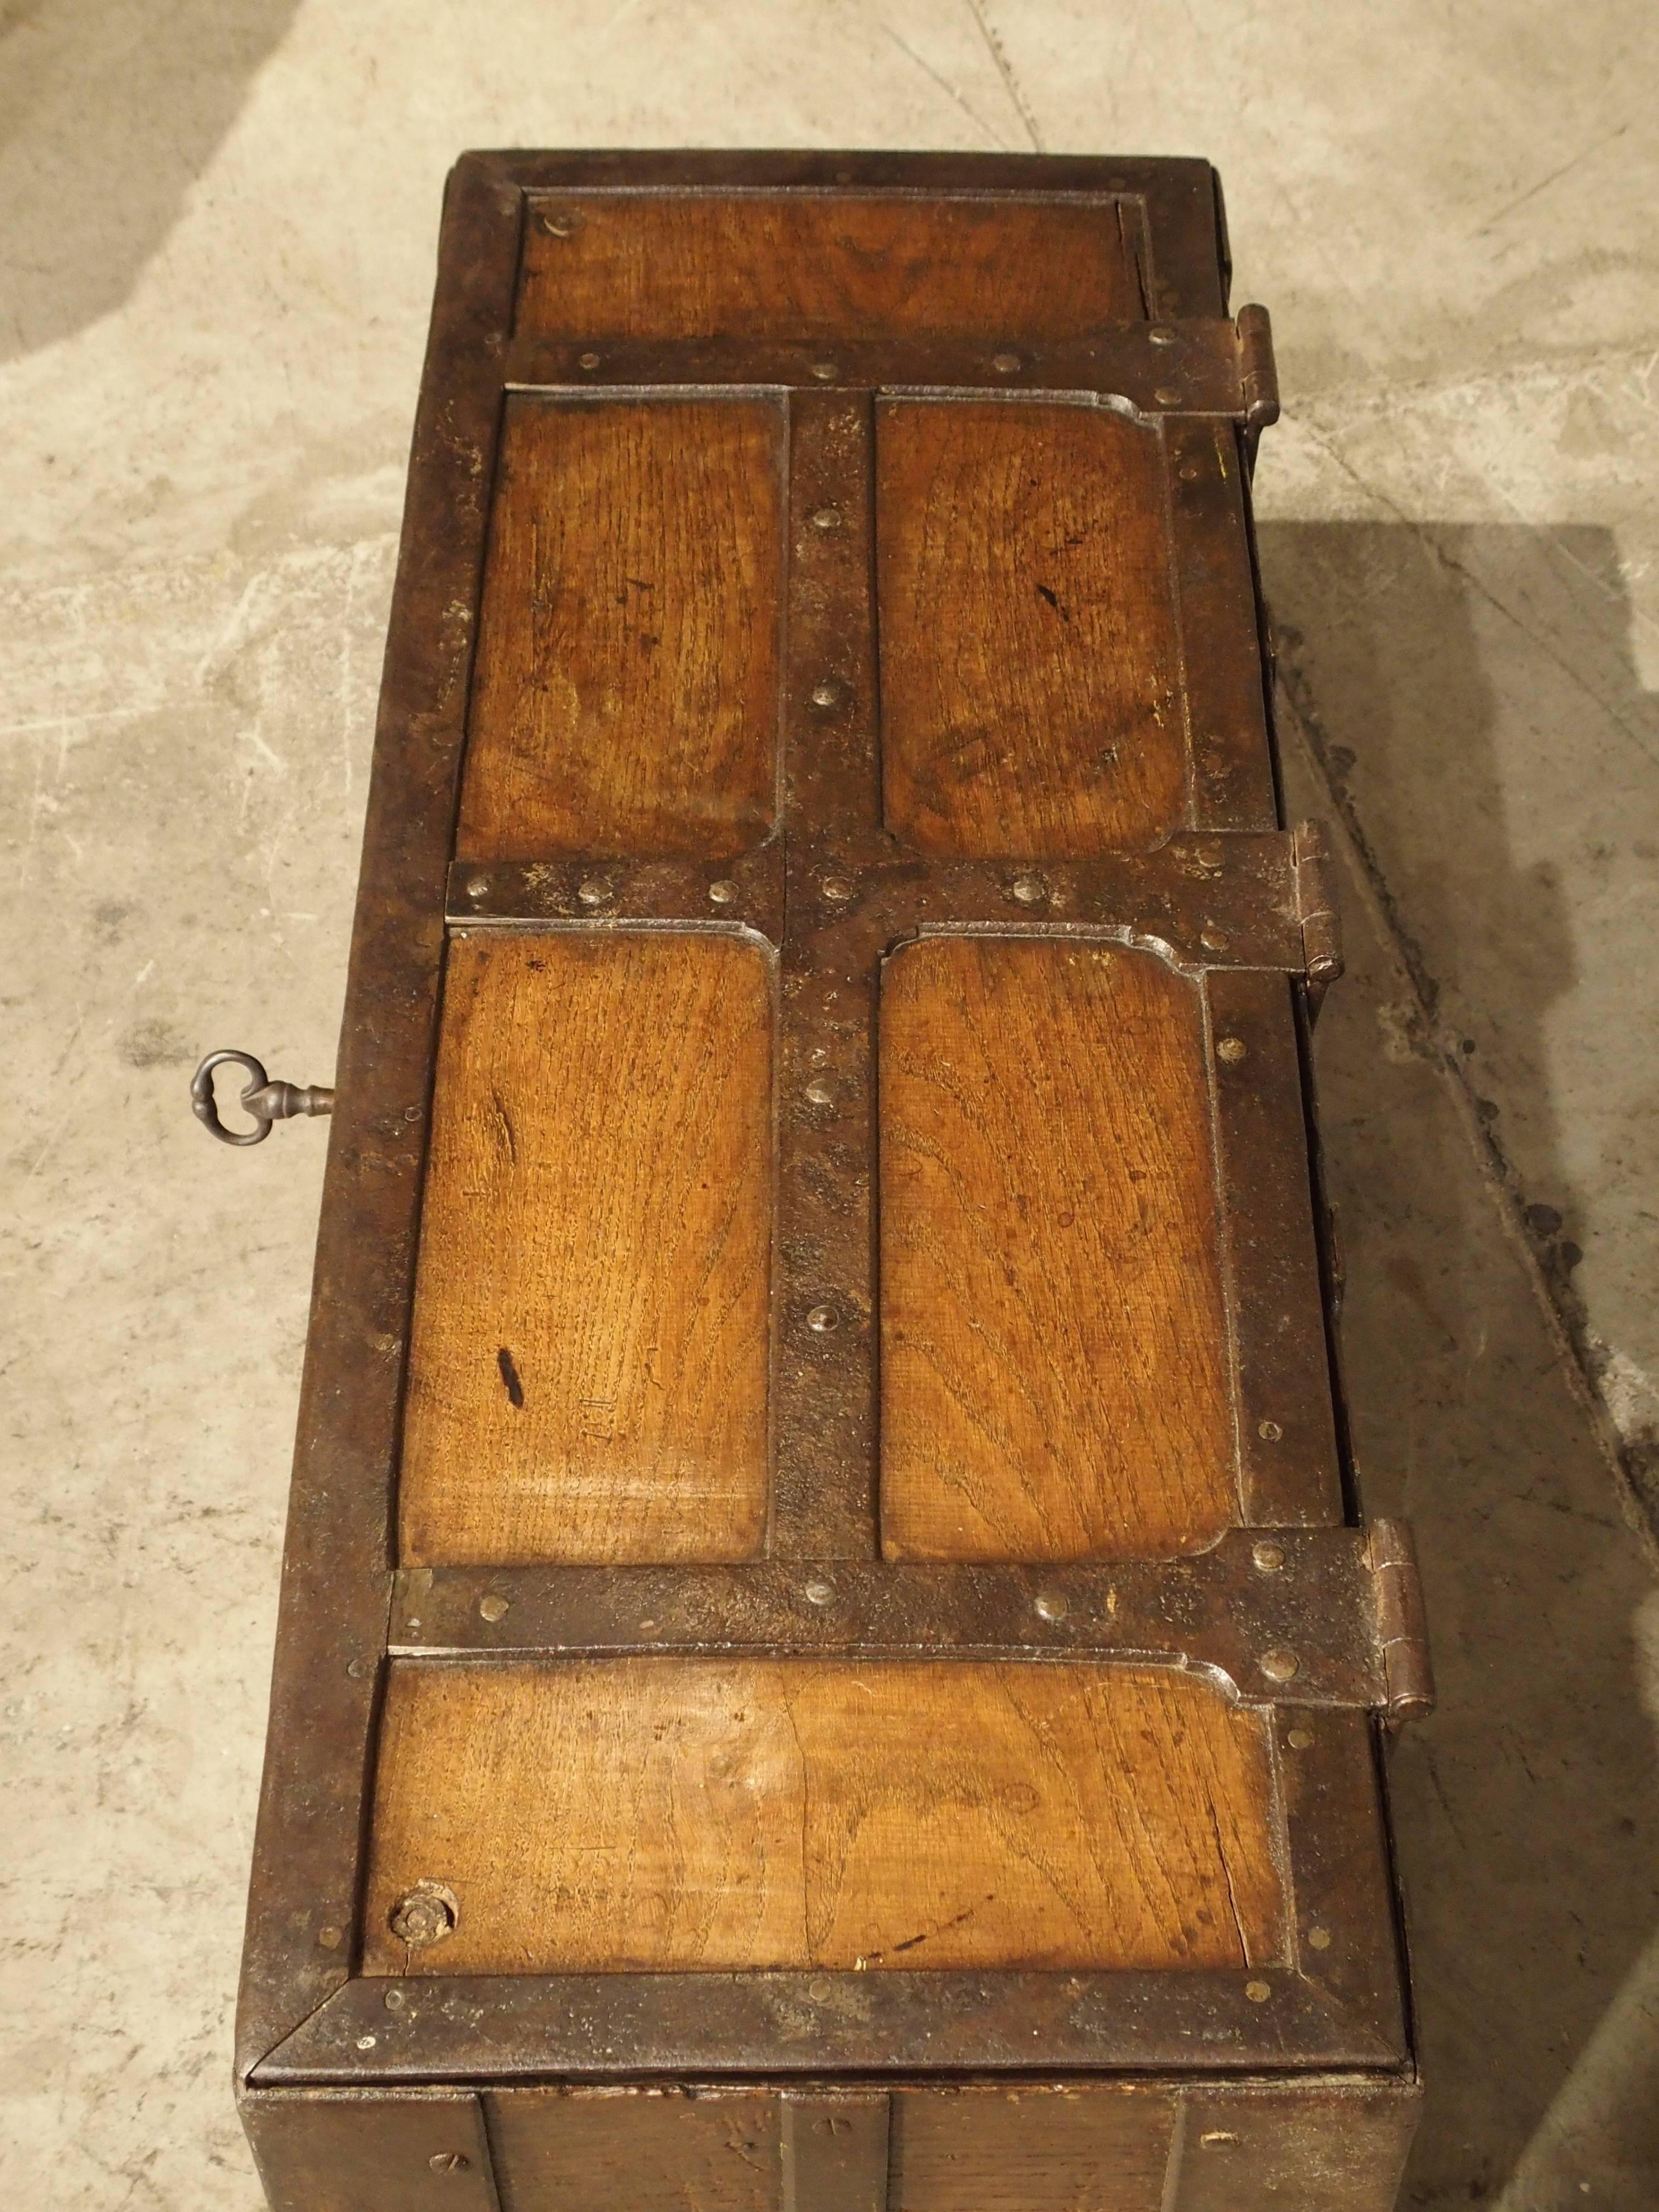 From the 1600s, this French money trunk is heavily clad with thick, iron strapping that goes completely around the trunk. Though this trunk’s ironwork was designed for the security of the money, it did not lack artistic design as noted on the front